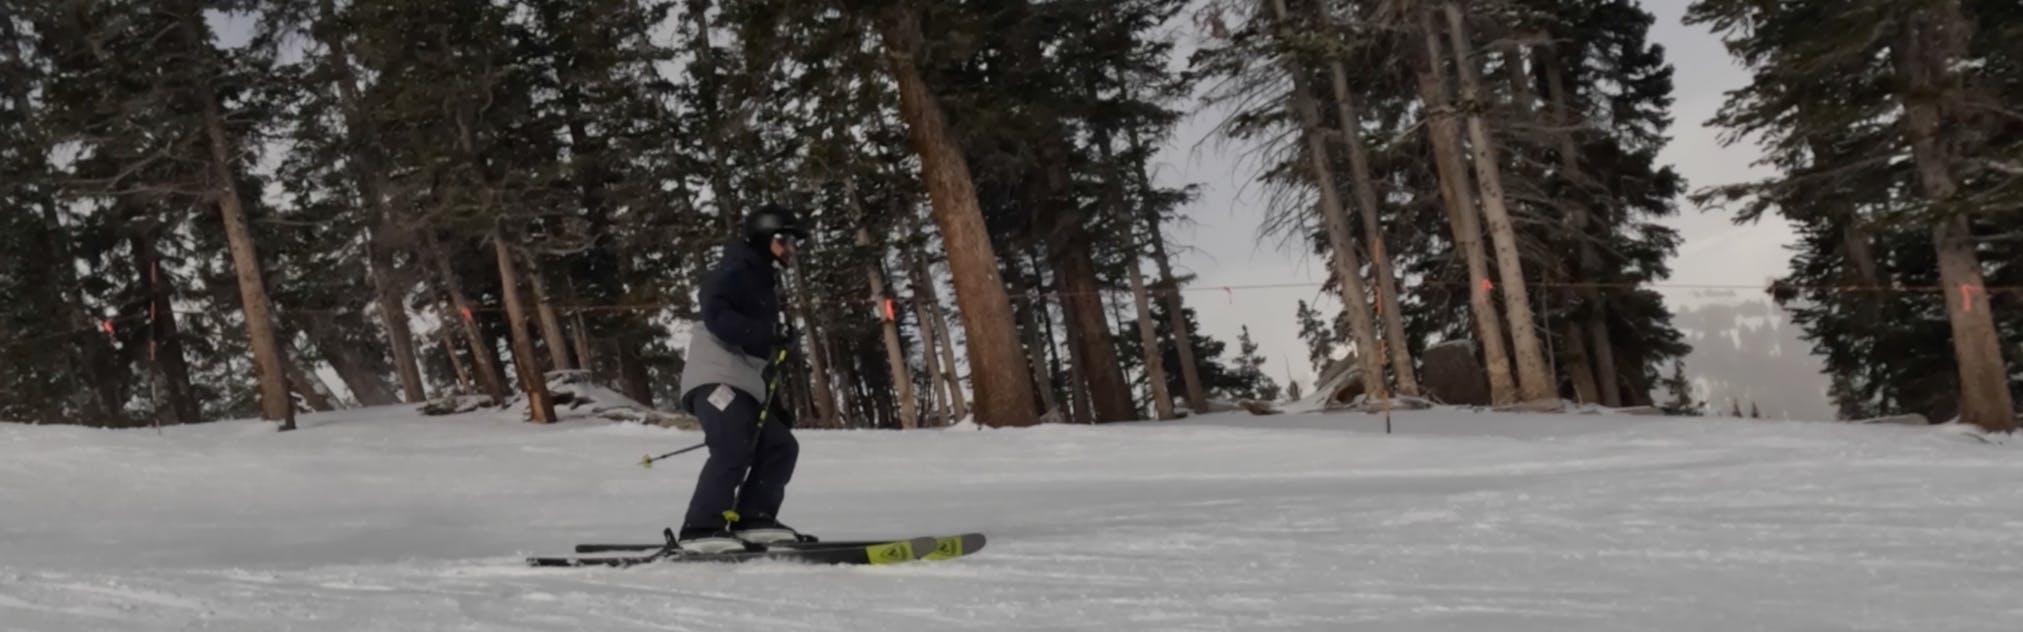 A skier on the 2023 Rossignol Sender 104 Ti Skis.